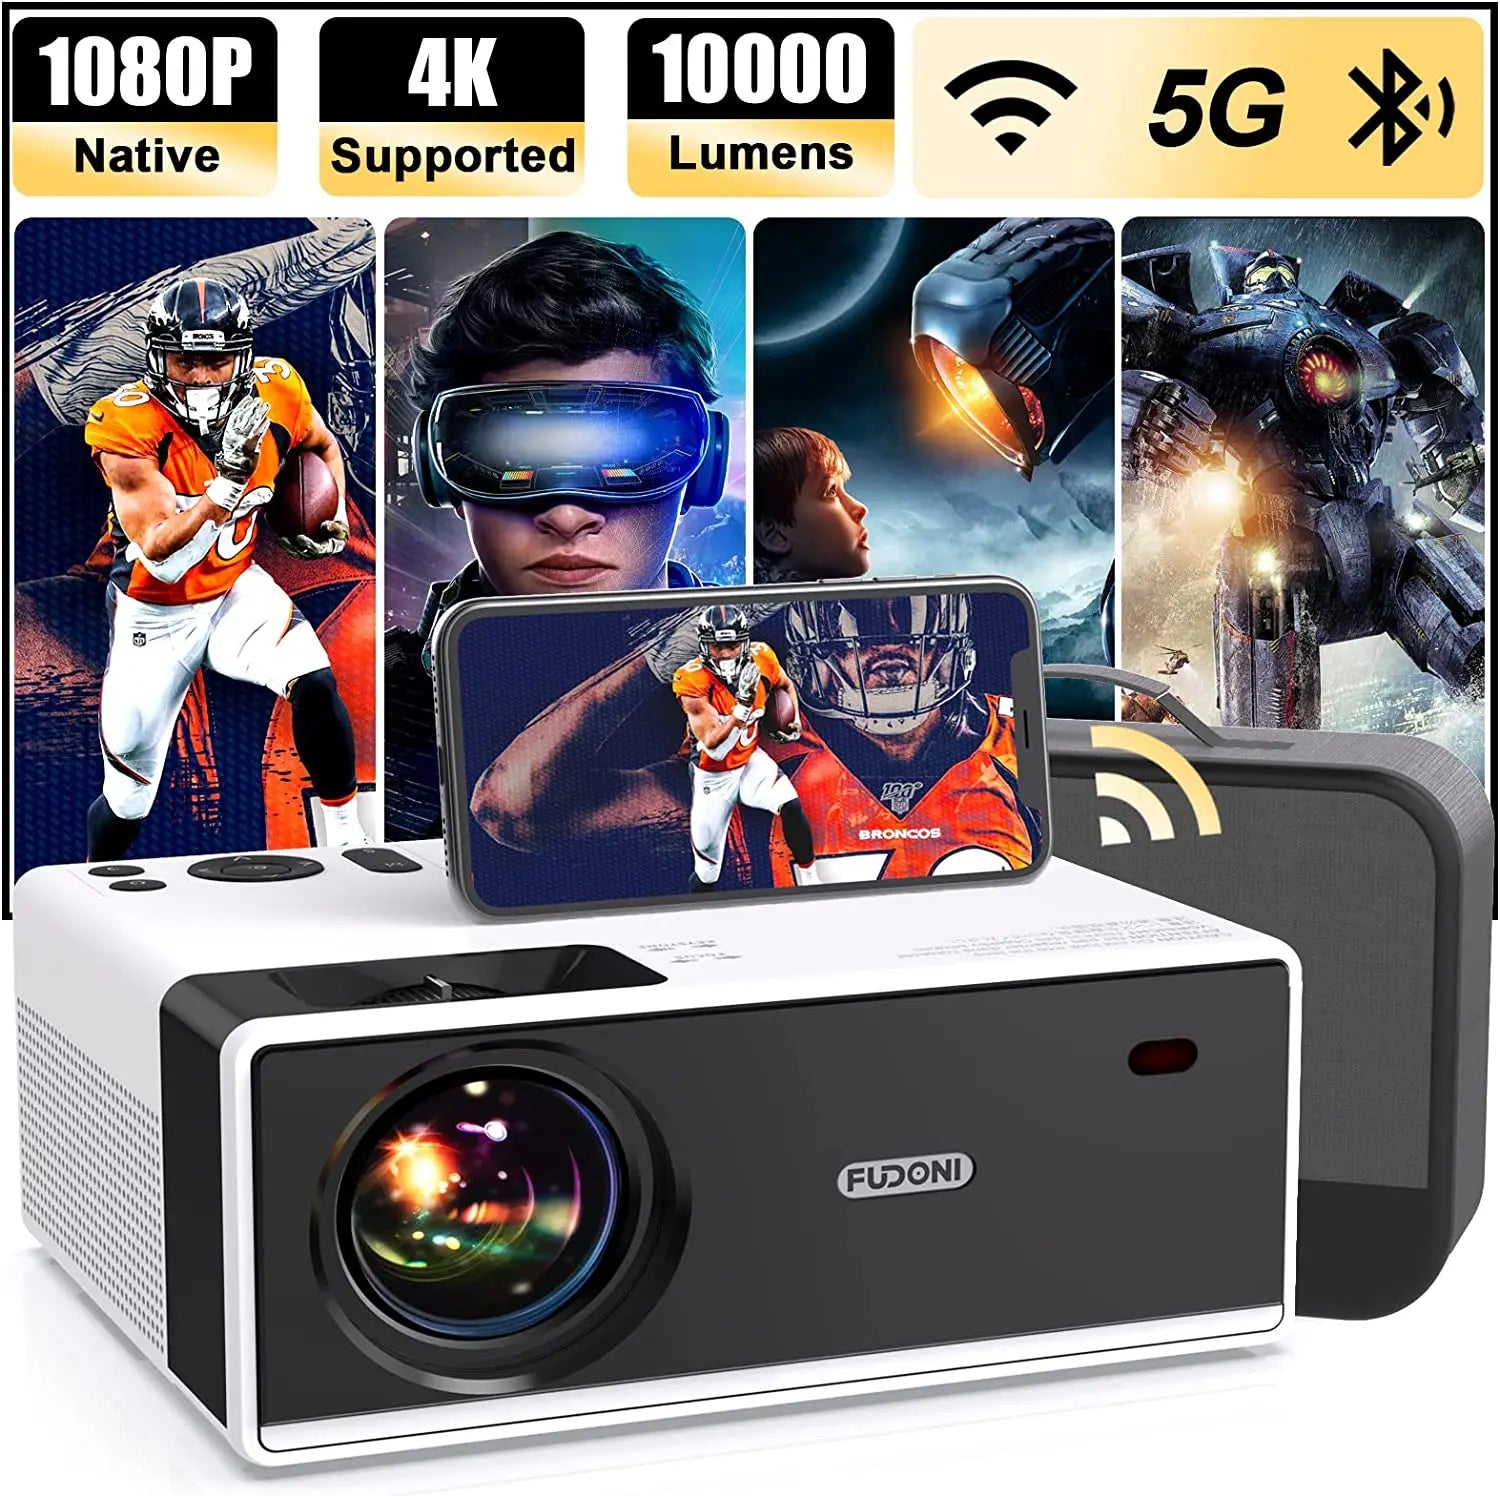 Android Smart DLP Mini Projector,4K LED 1080P WiFi Bluetooth Pocket  Projector HD Home Theater Movie Family Cinema, Support  WiFi/HDMI/Bluetooth/USB/TF